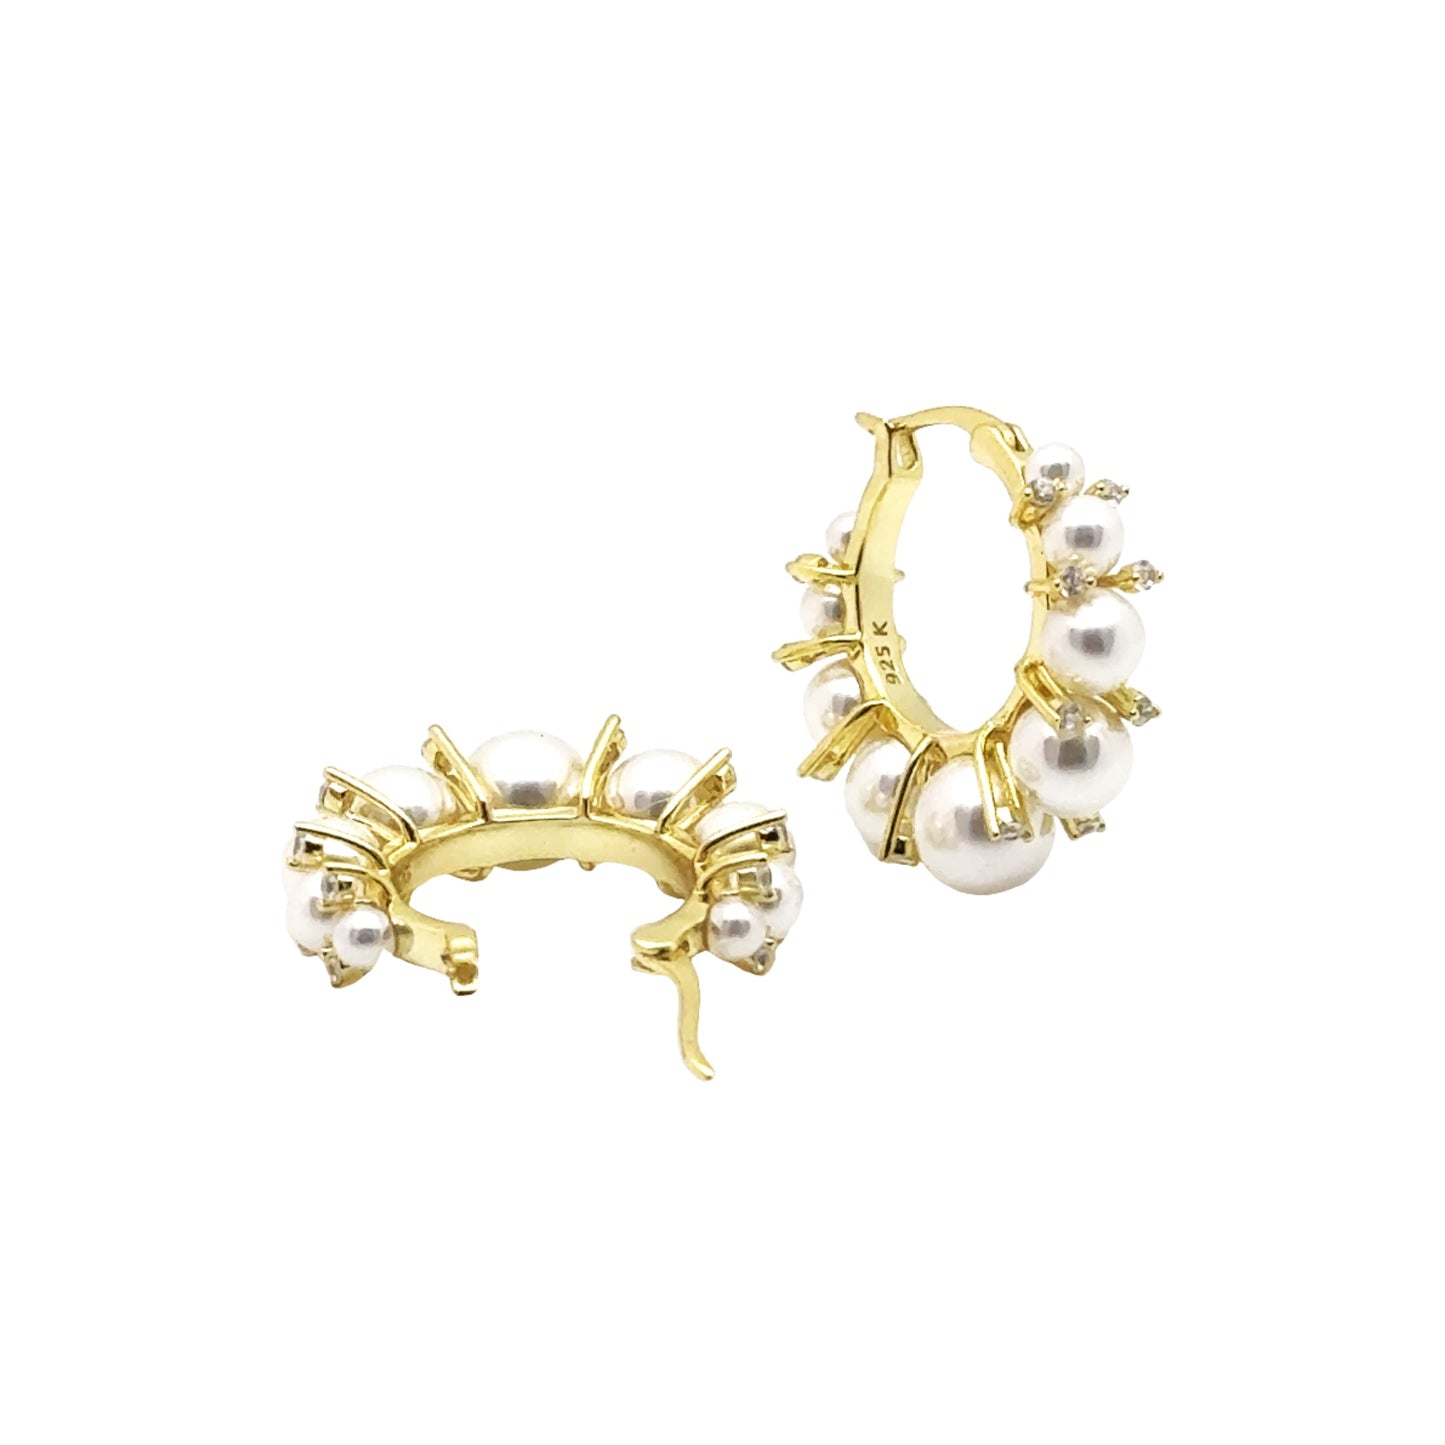 Pearl Hoop Earrings in 18k Gold Over Silver with Pearls and CZs